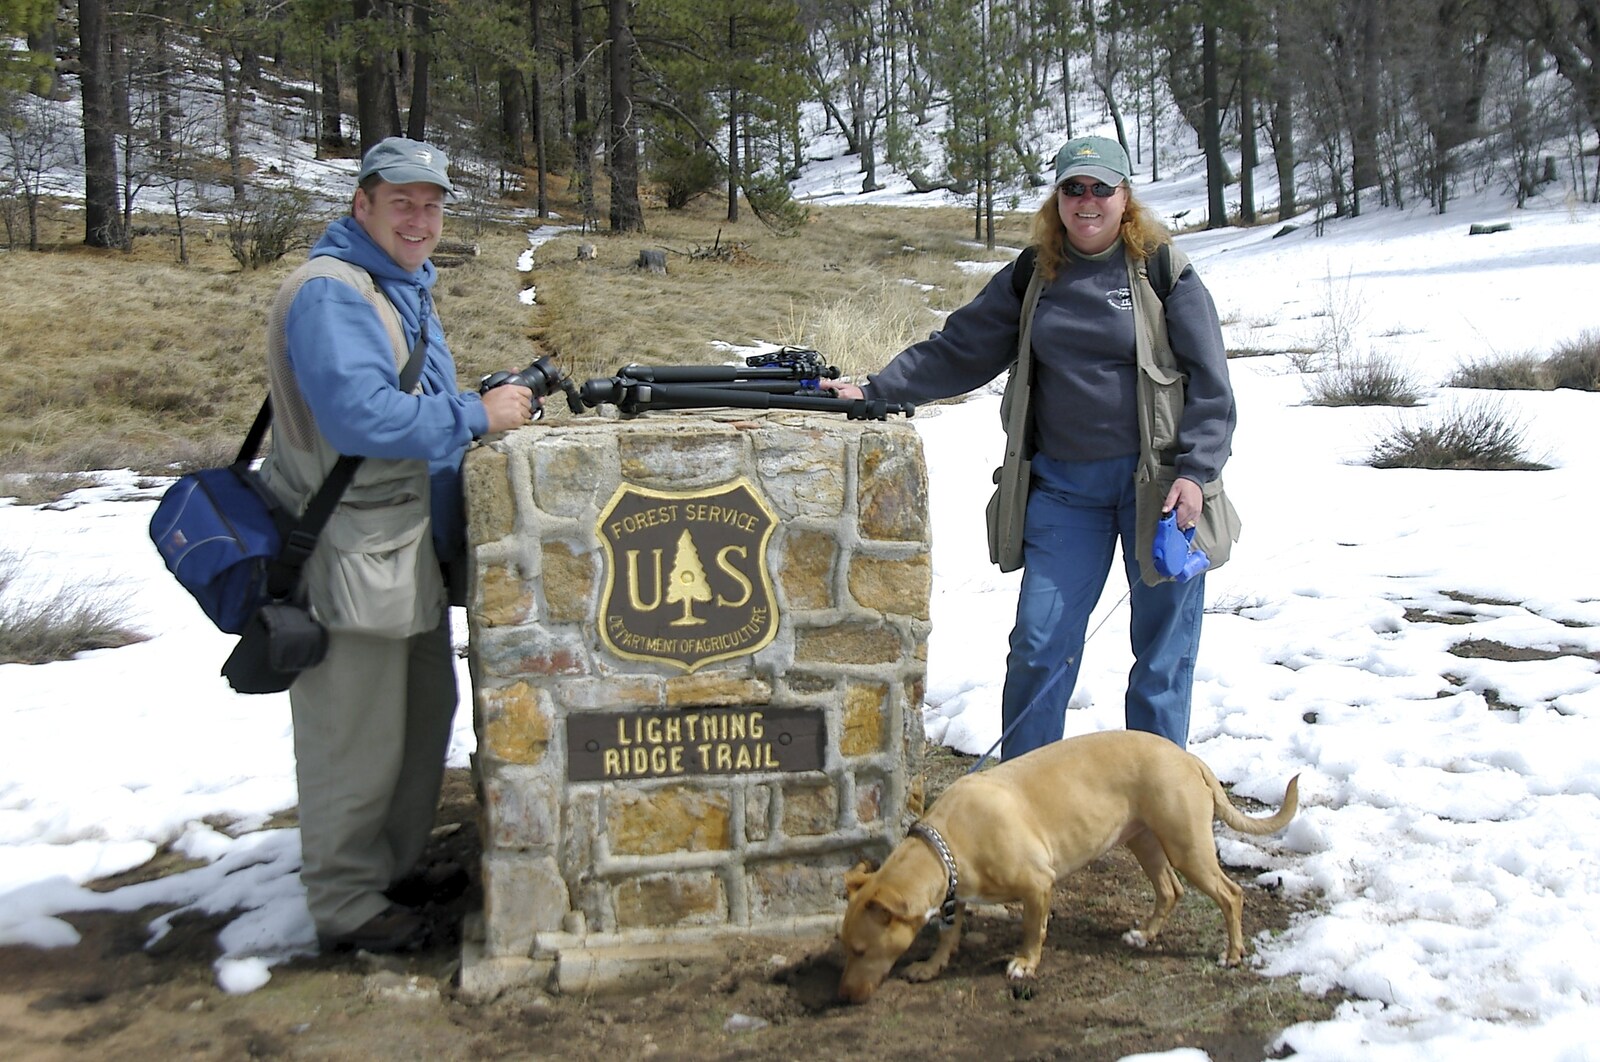 Ken, Jen and the dog pause by the trail marker from California Snow: San Bernadino State Forest, California, US - 26th March 2006